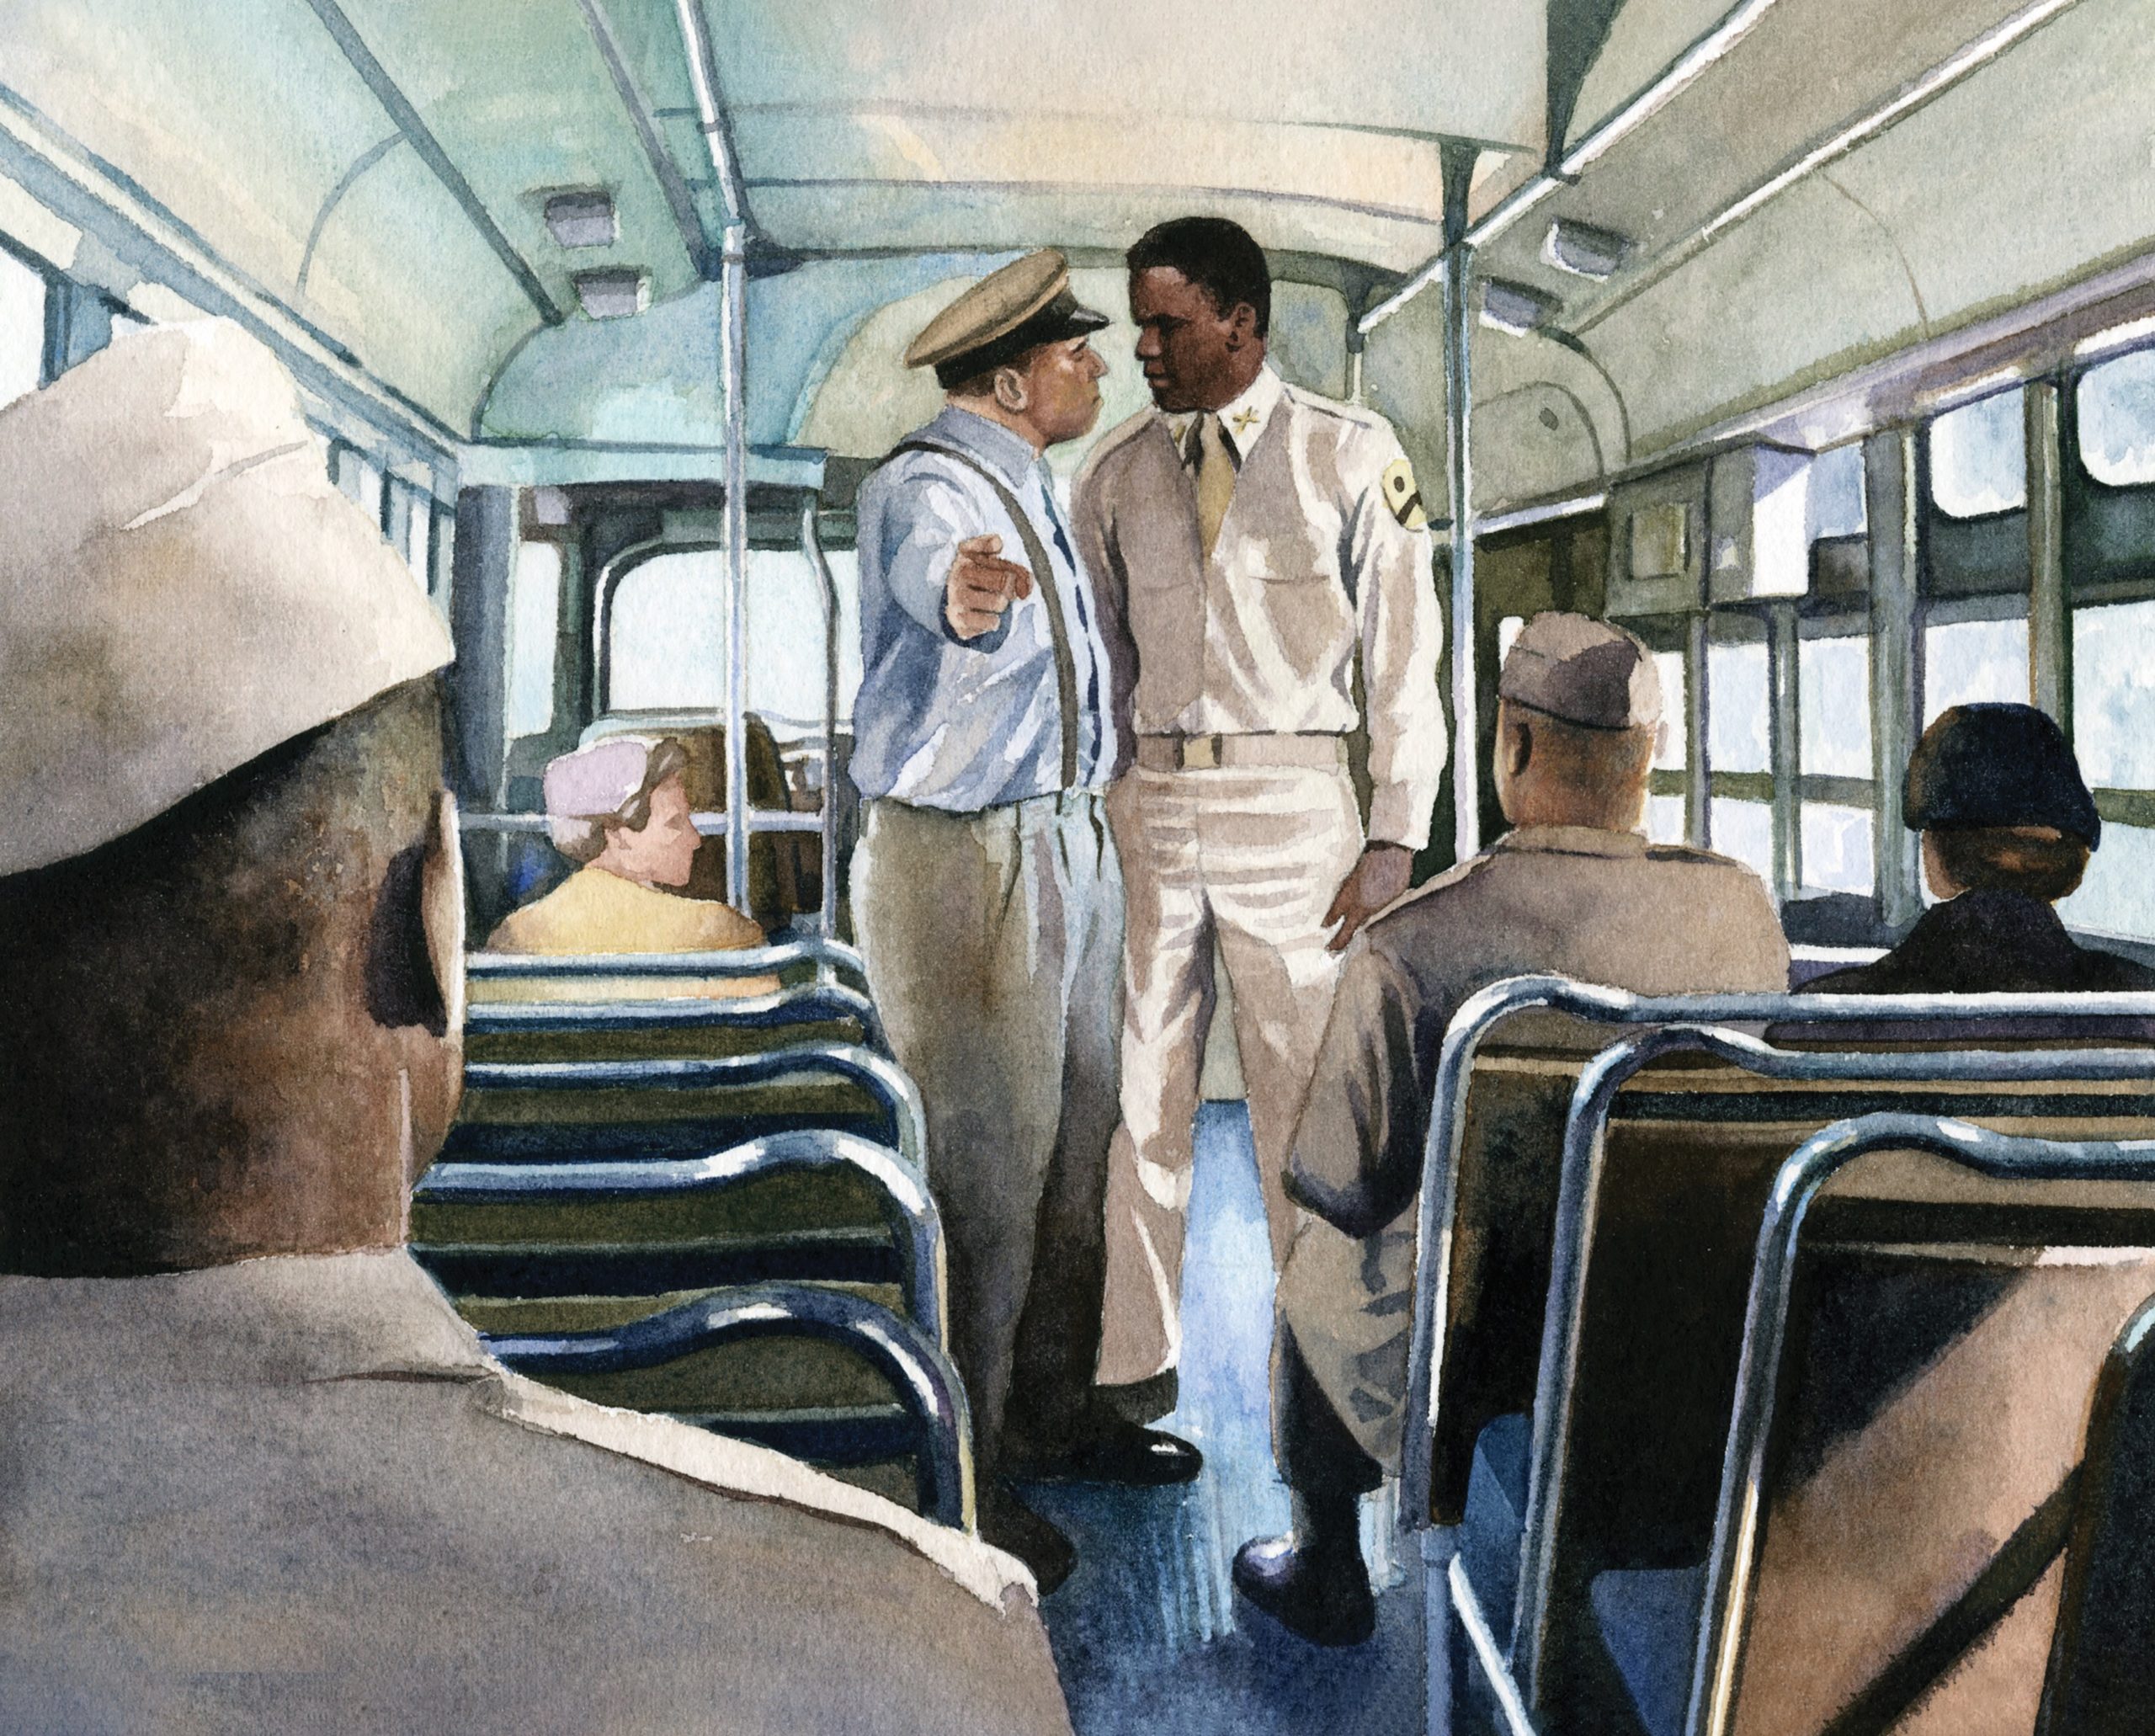 Jackie Robinson Refused to Move to the Back of the Bus. Here's How